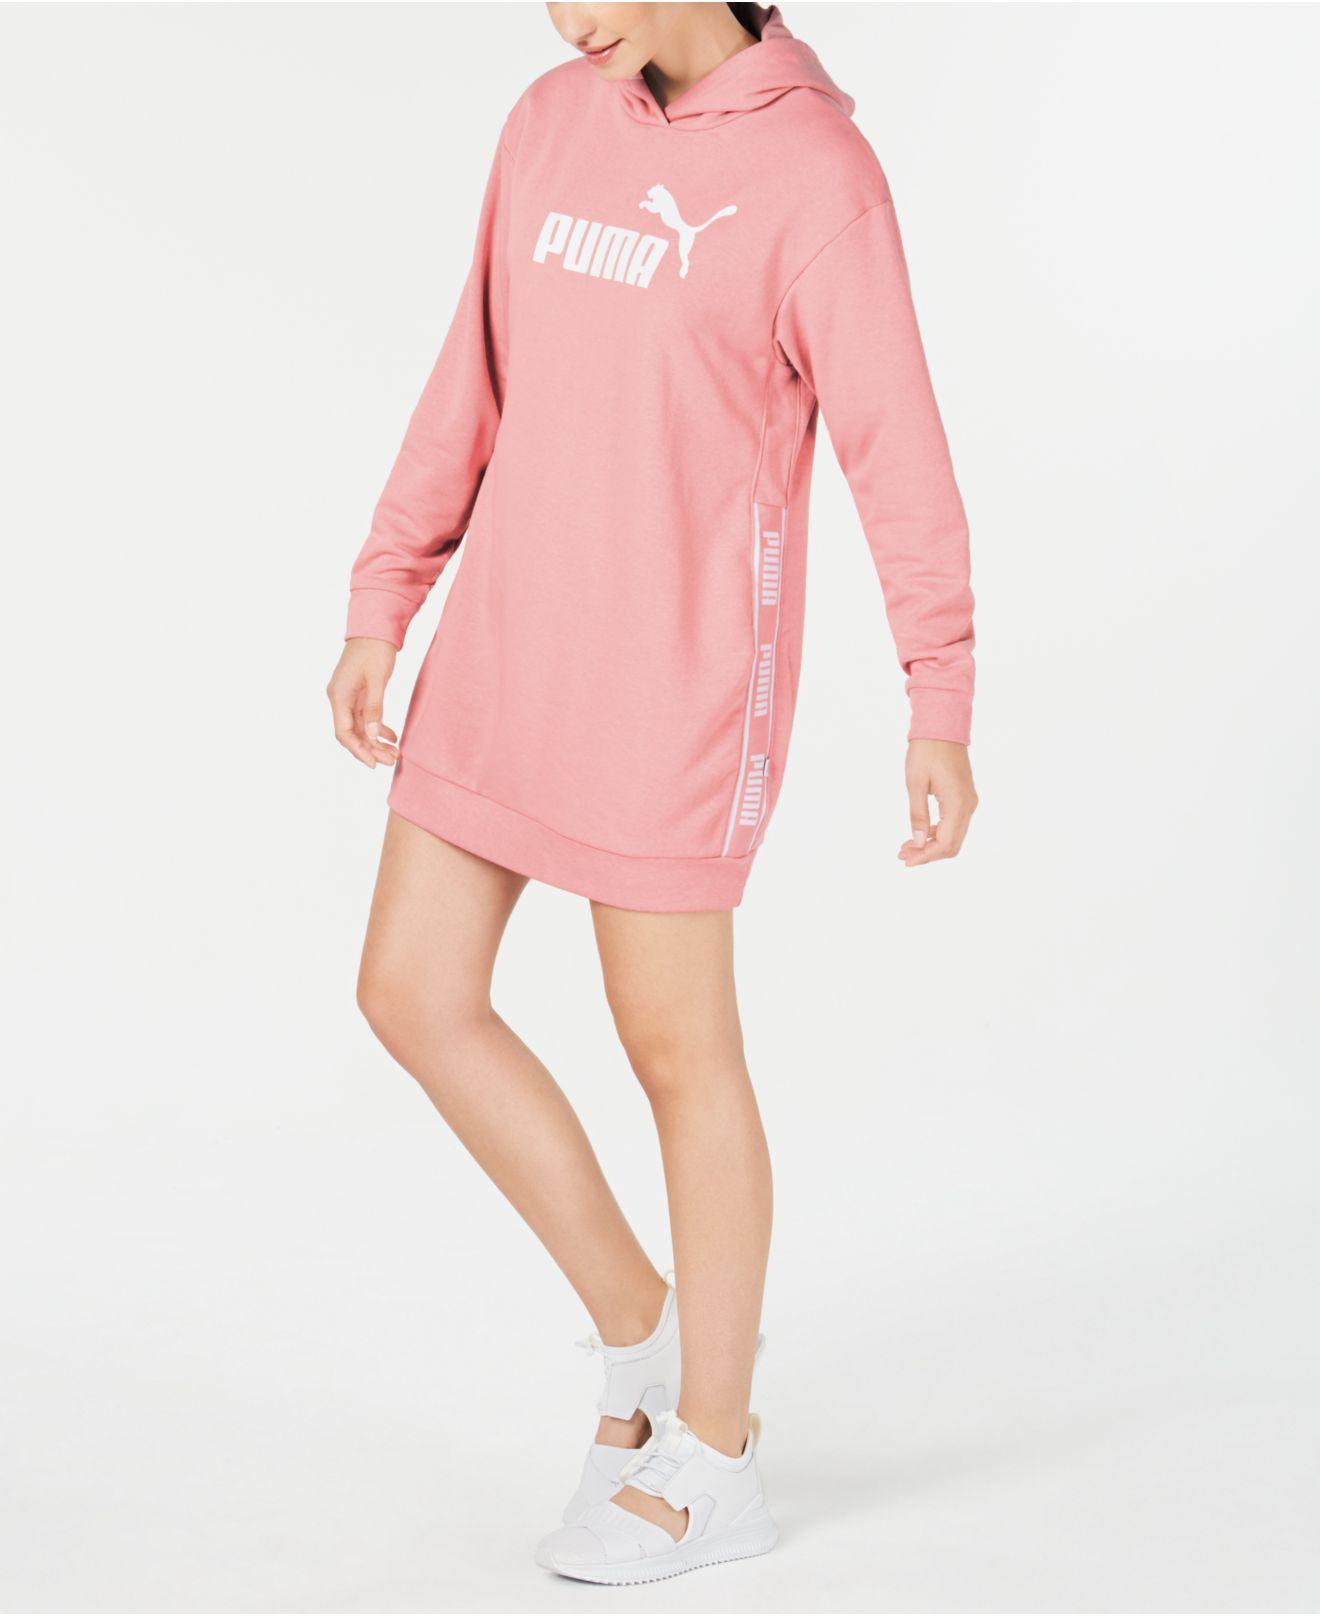 PUMA Cotton Amplified Hoodie Dress in Pink - Lyst